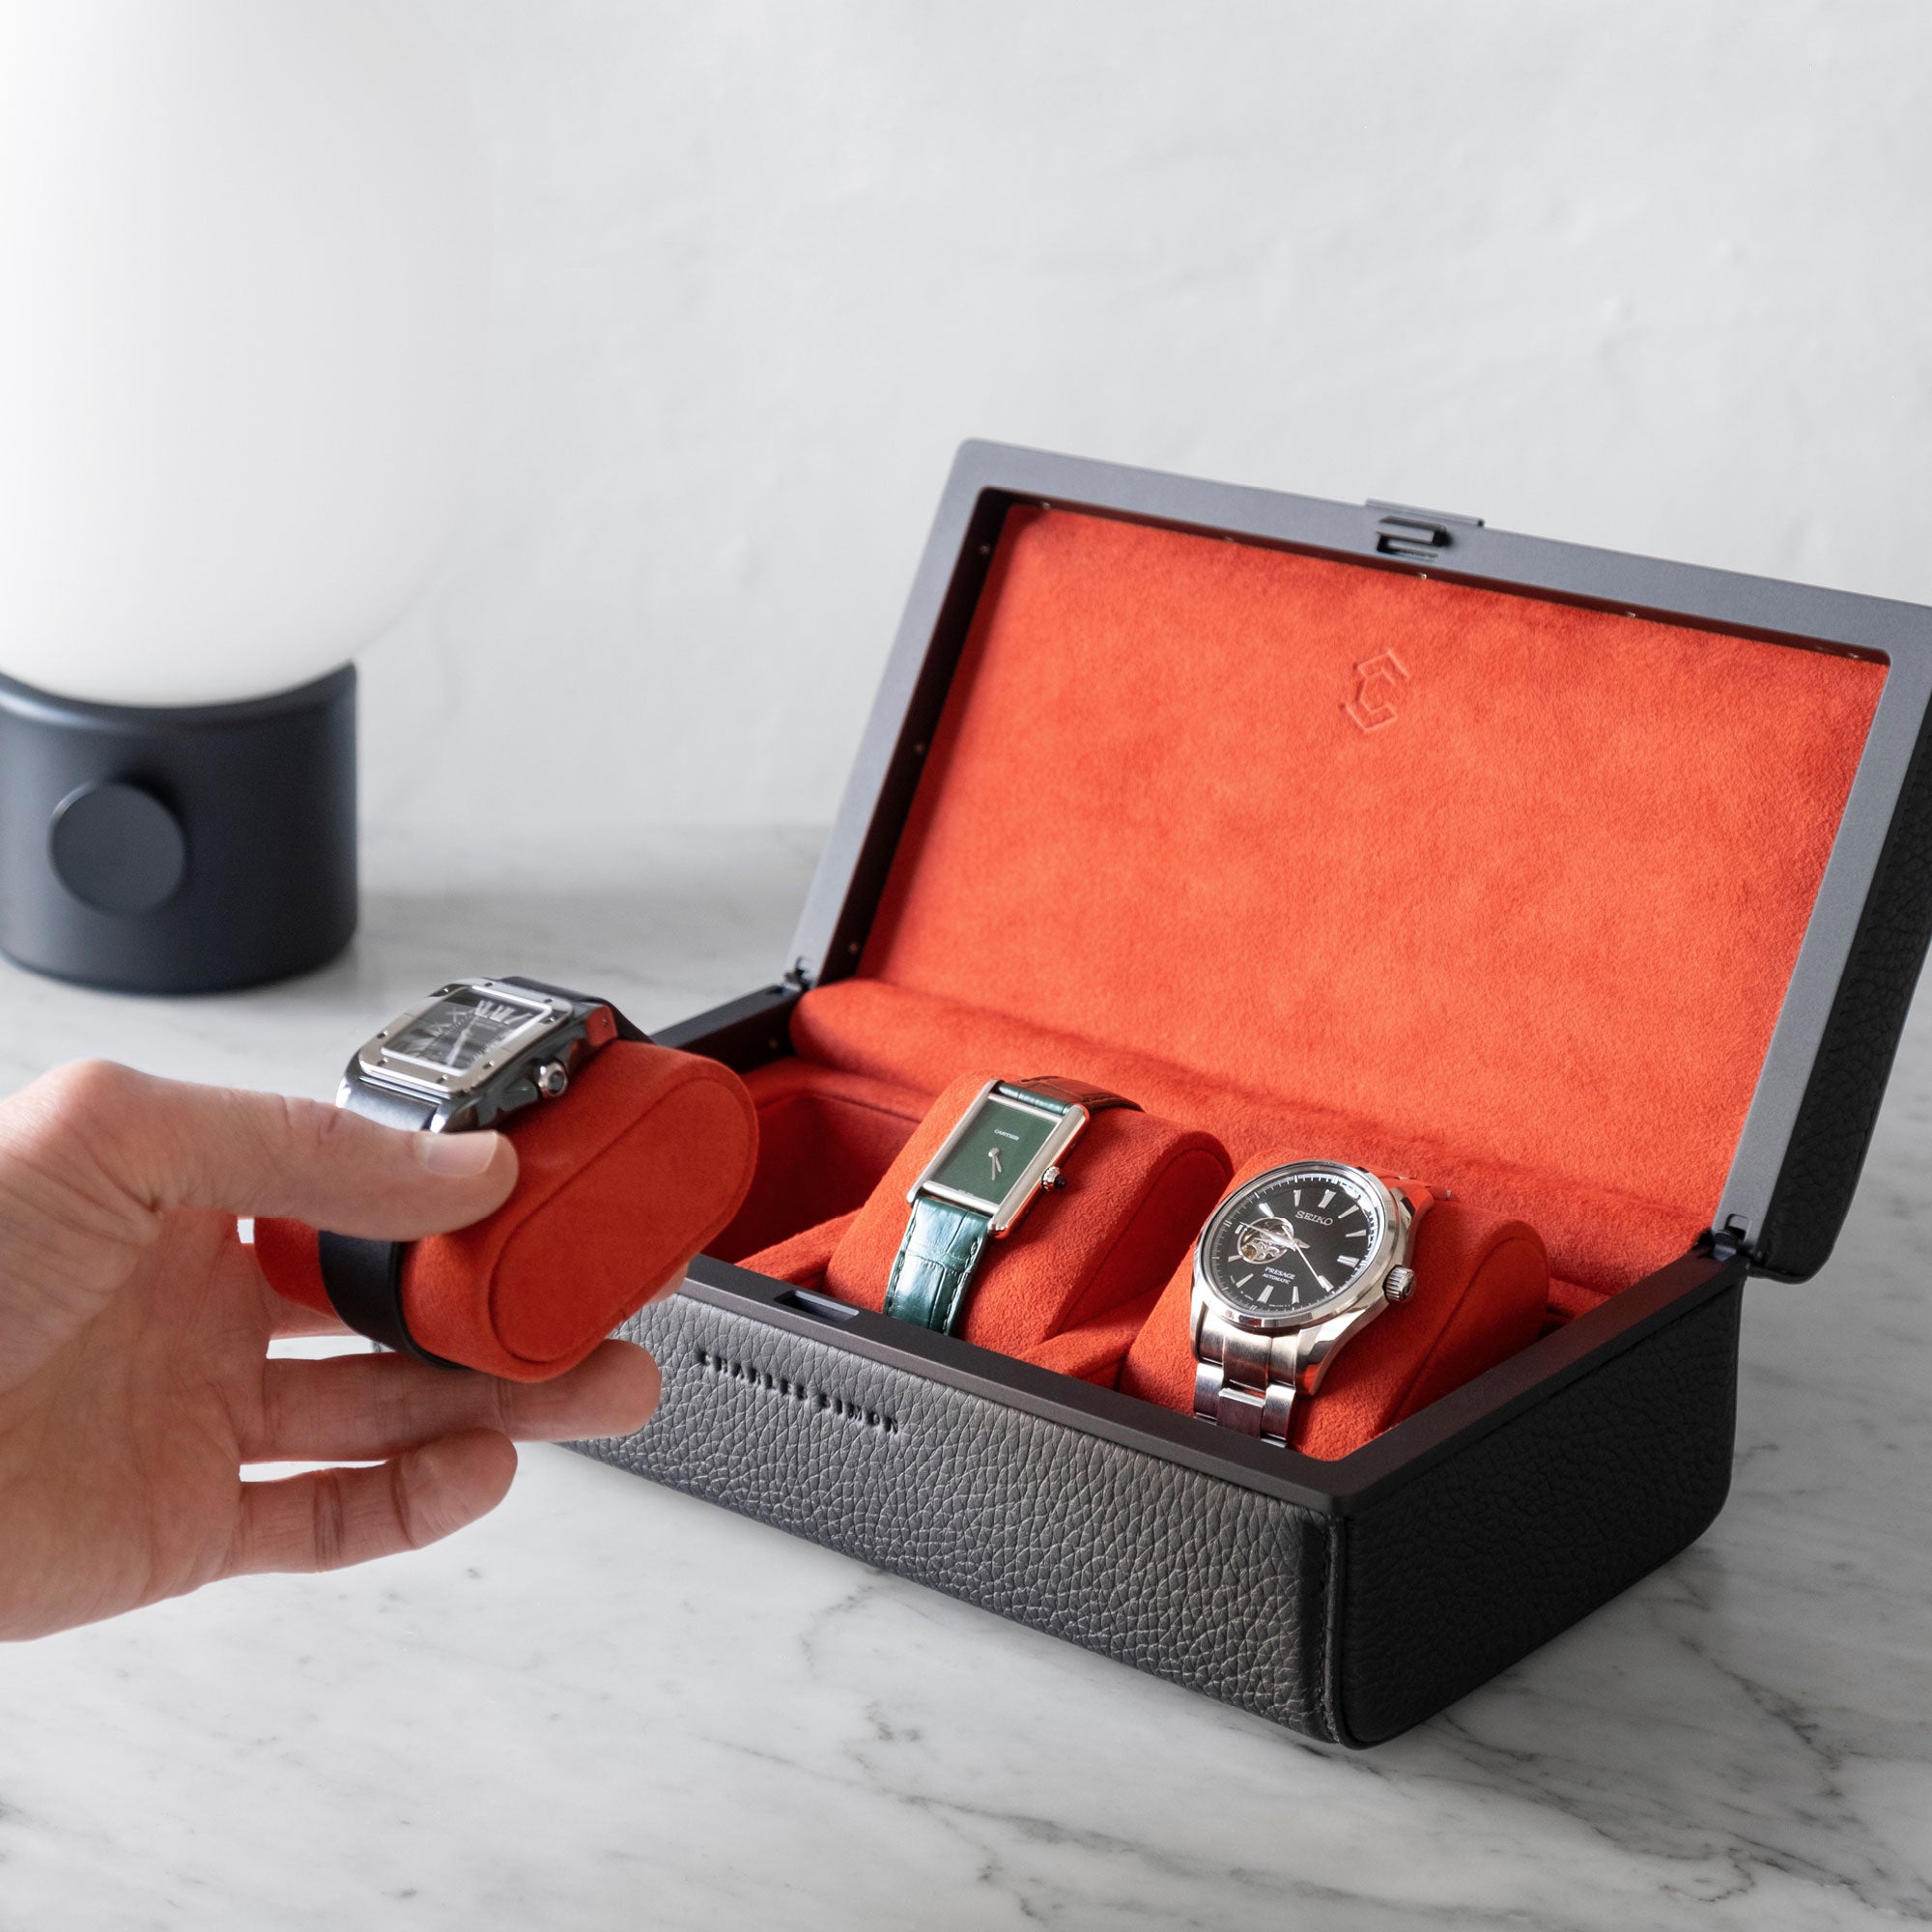 Lifestyle shot of man taking Cartier watch placed on vermilion removable Alcantara cushion from a Charles Simon Eaton 3 watch case in black leather with black anodized aluminum that is holding three men’s watches